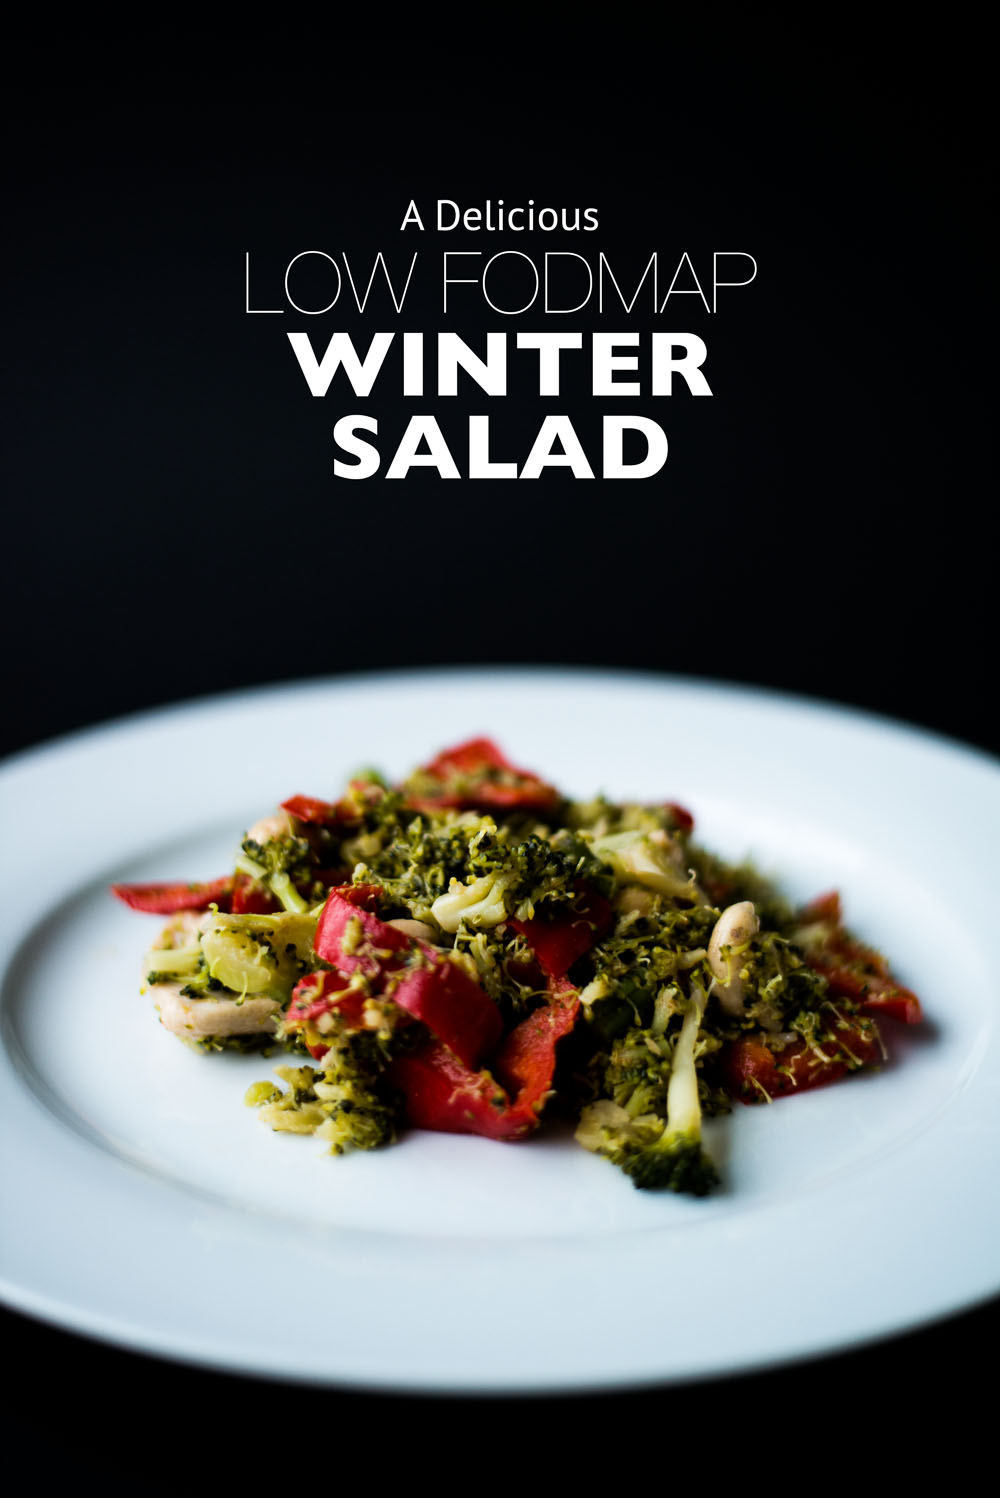 A Delicious Low FODMAP Winter Salad by Olivia Bossert from oliviablogs.com